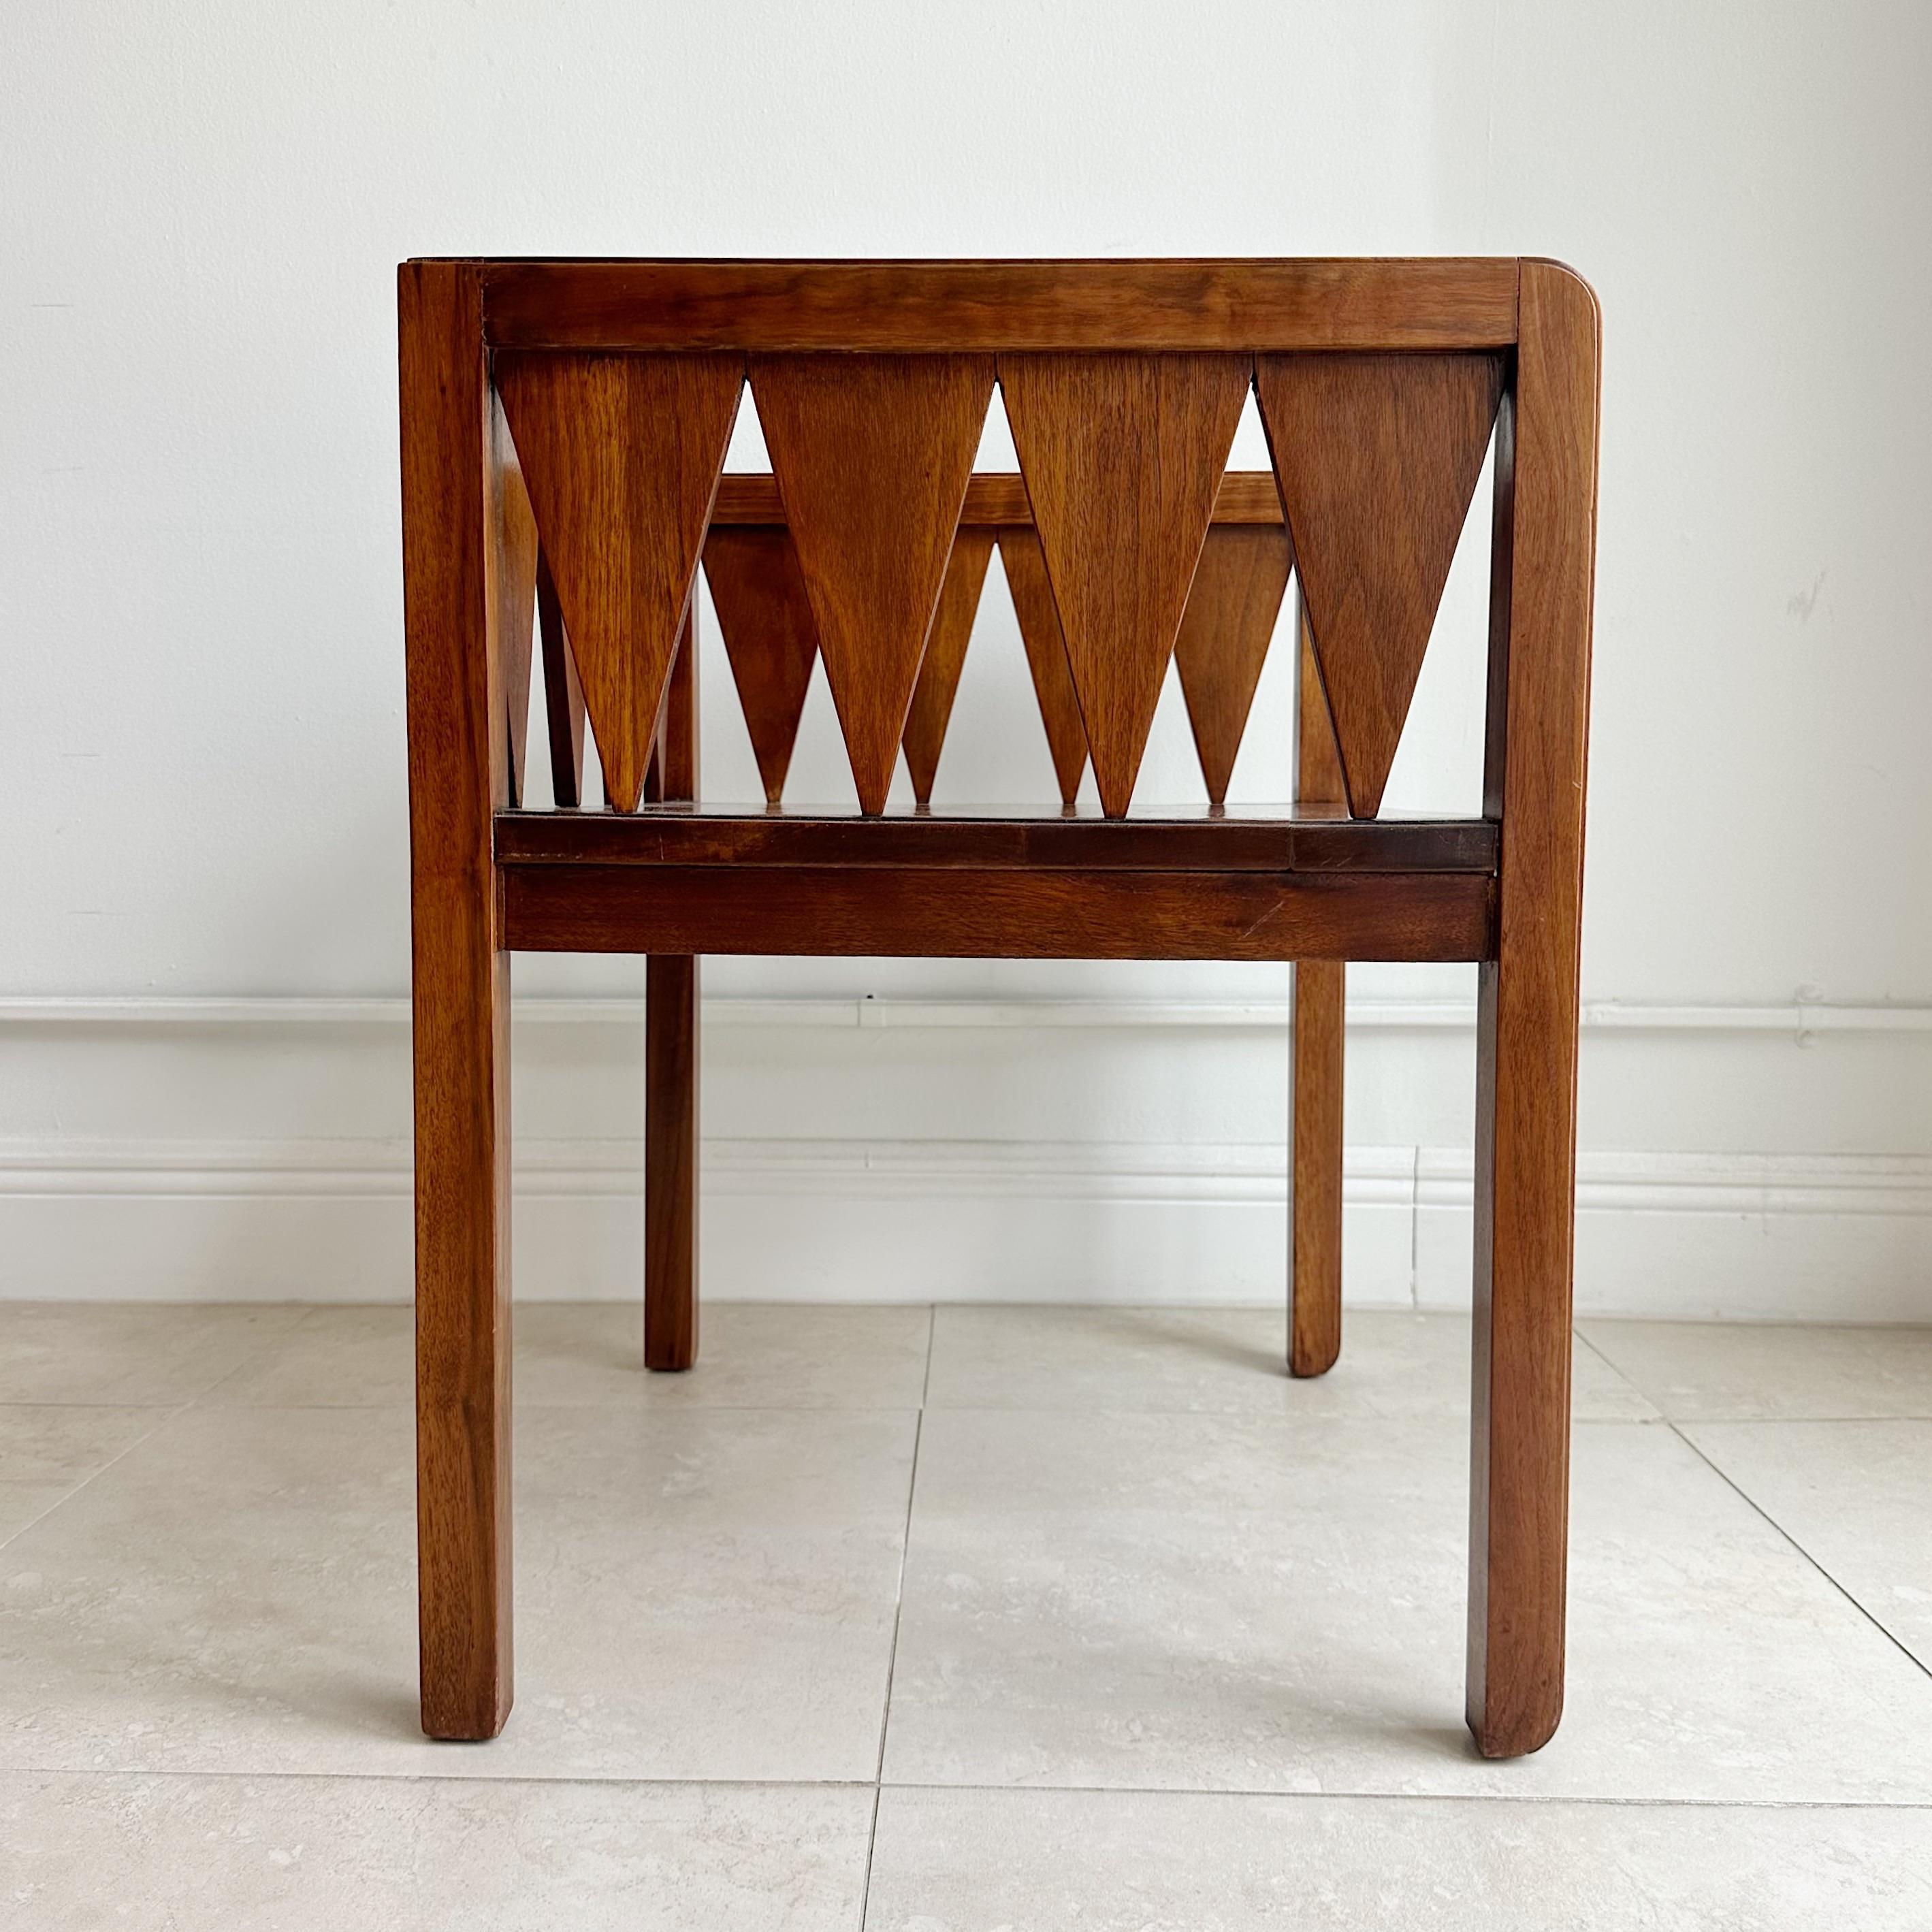 Hand-Crafted Important Custom One of One Paul Frankl Galleries Skyscraper Chair, circa 1927